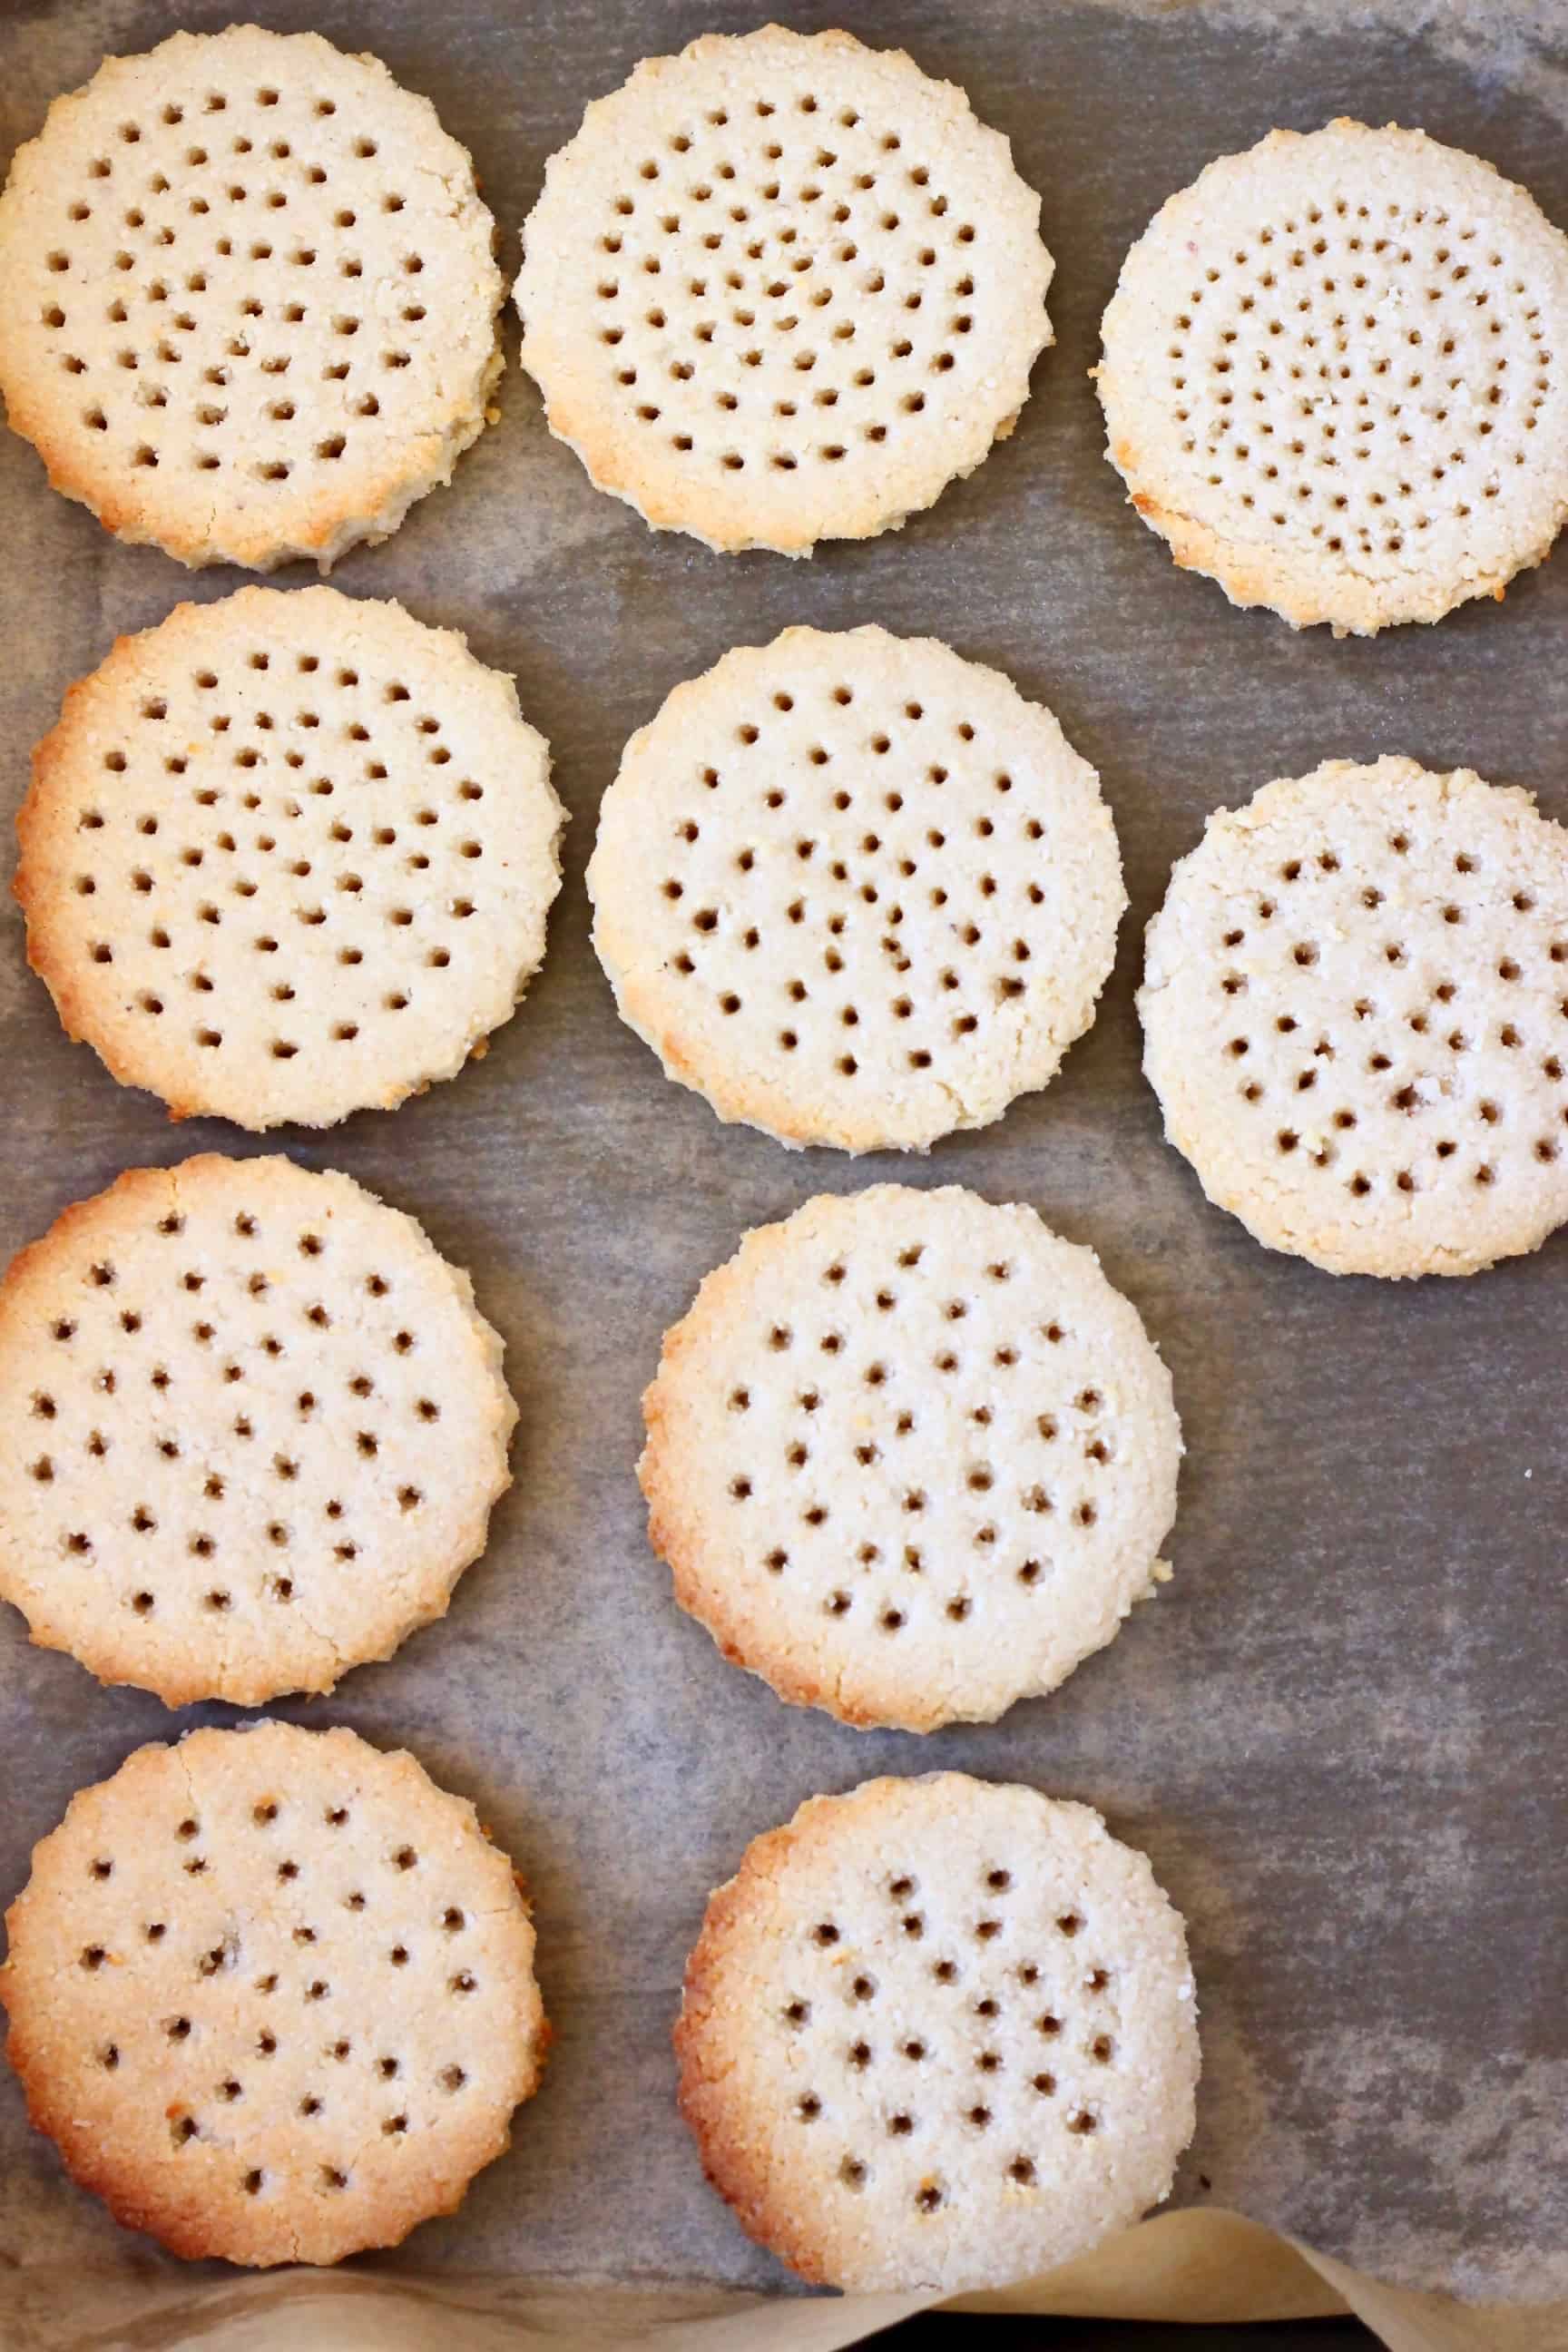 Ten shortbread cookies with holes cut out on a baking tray